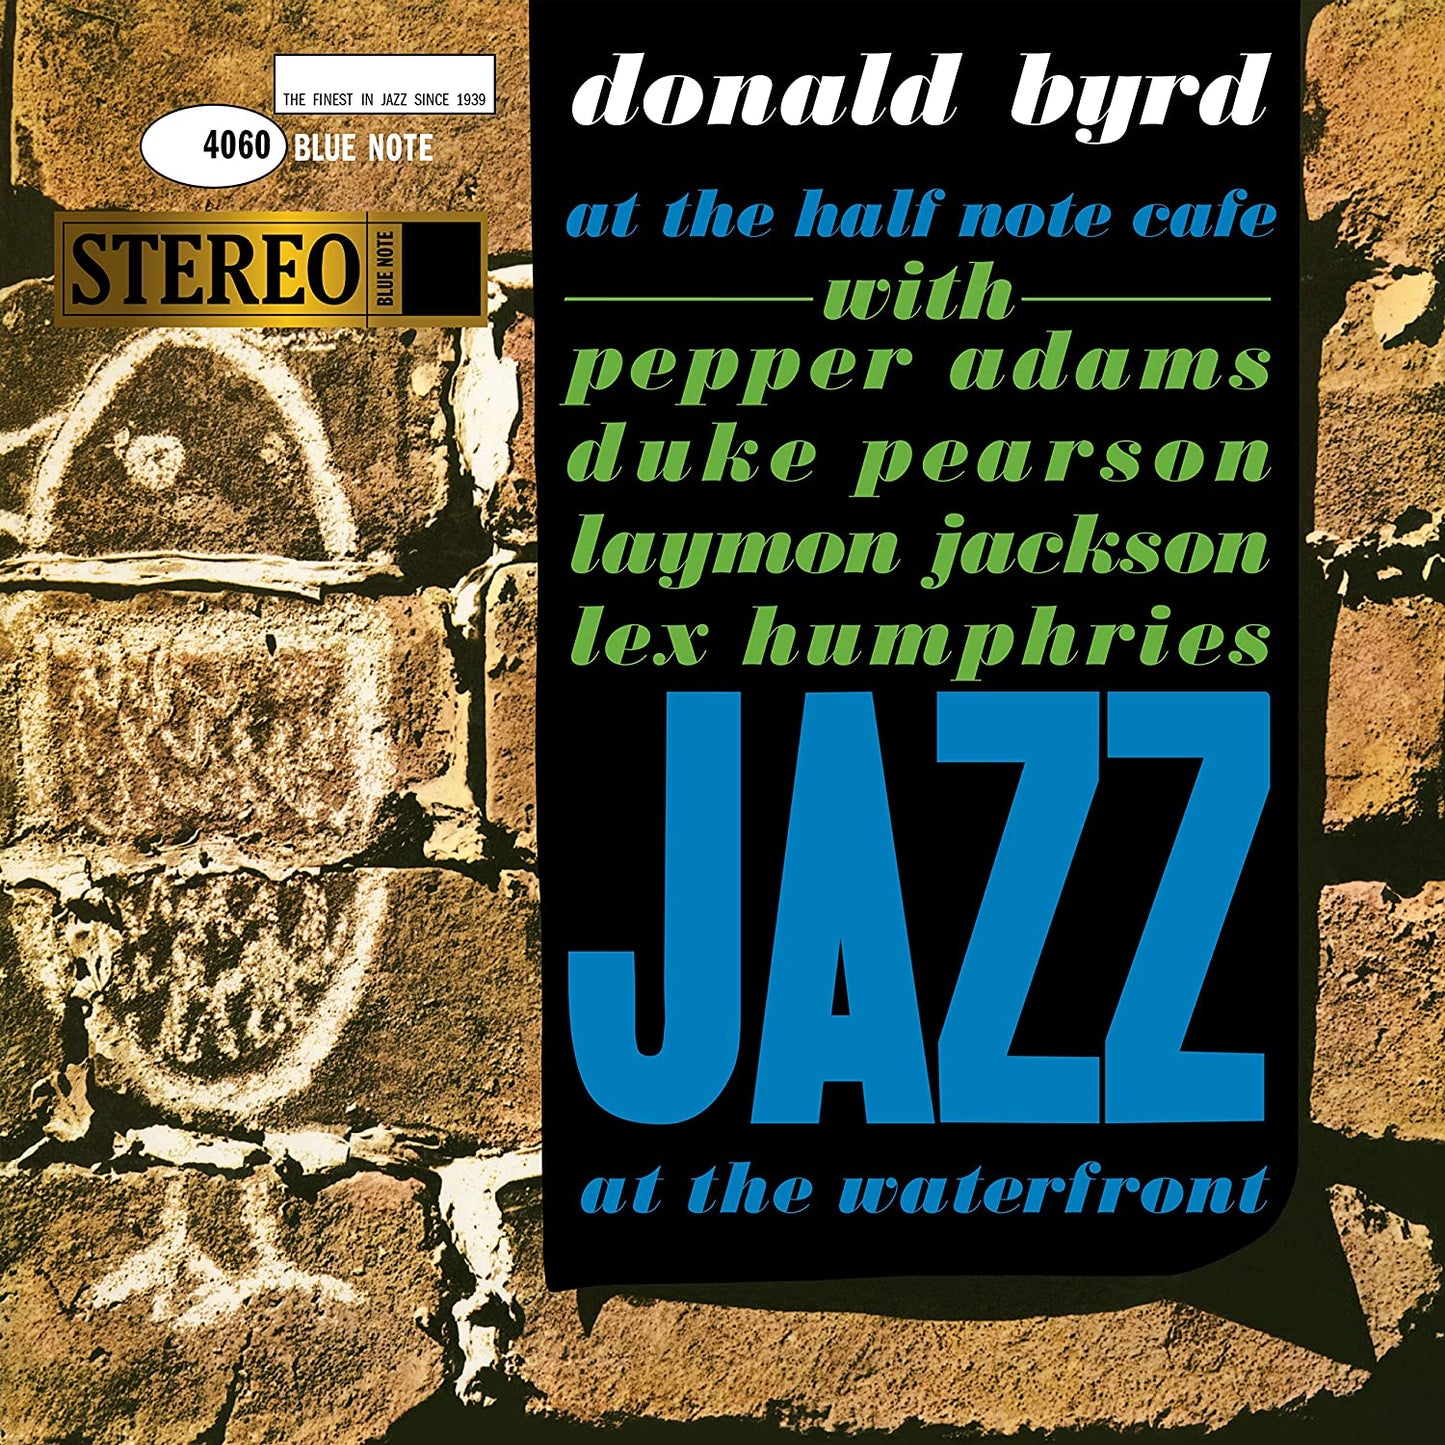 Byrd, Donald/At The Half Note Cafe Vol. 1 (Blue Note Tone Poet) [LP]